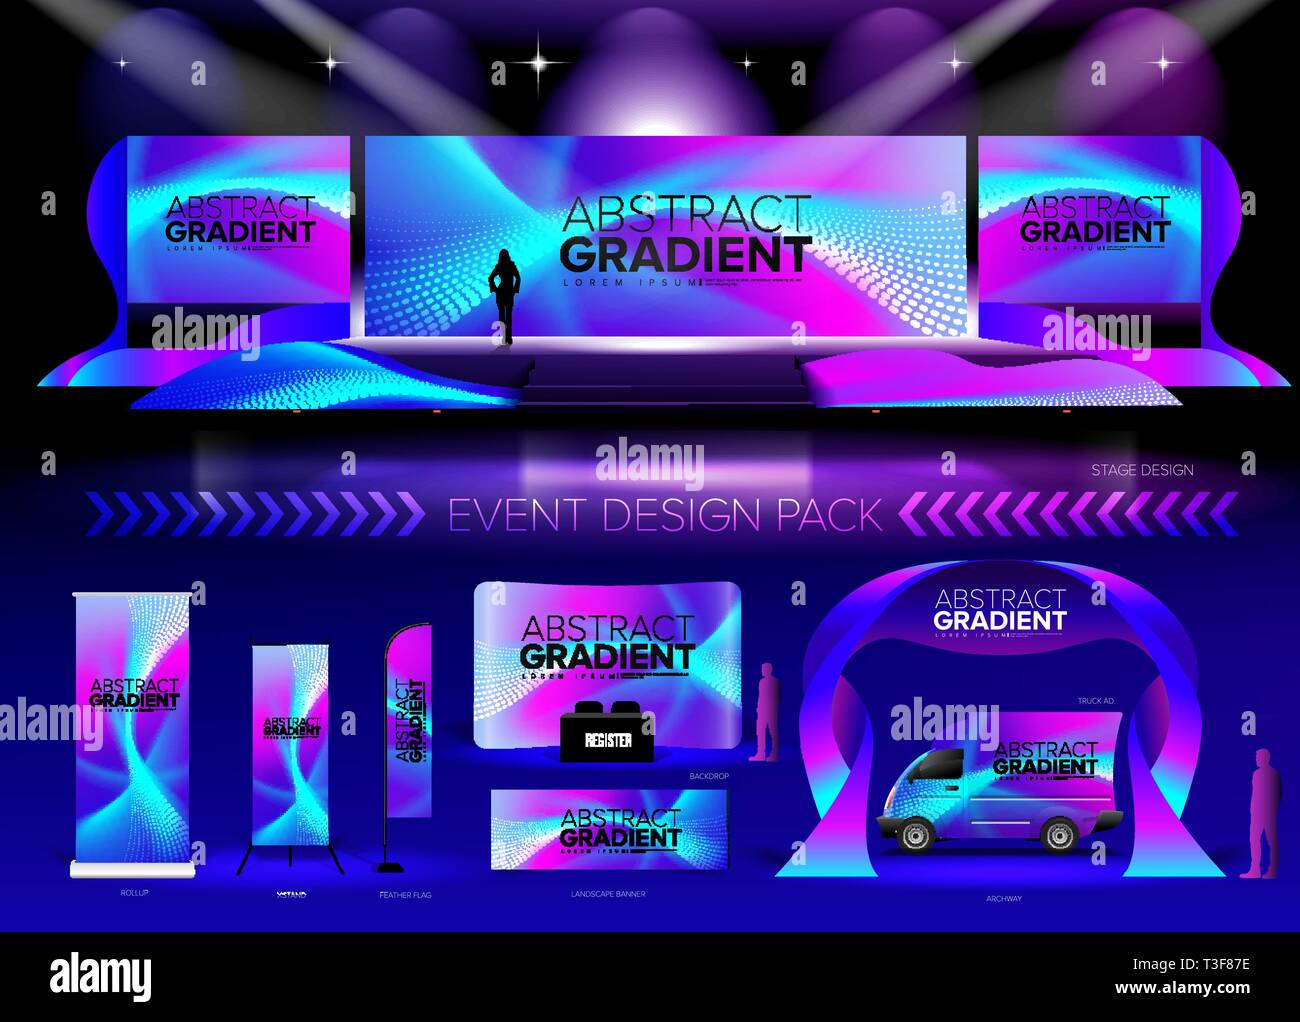 Event Design Pack Stock Vector